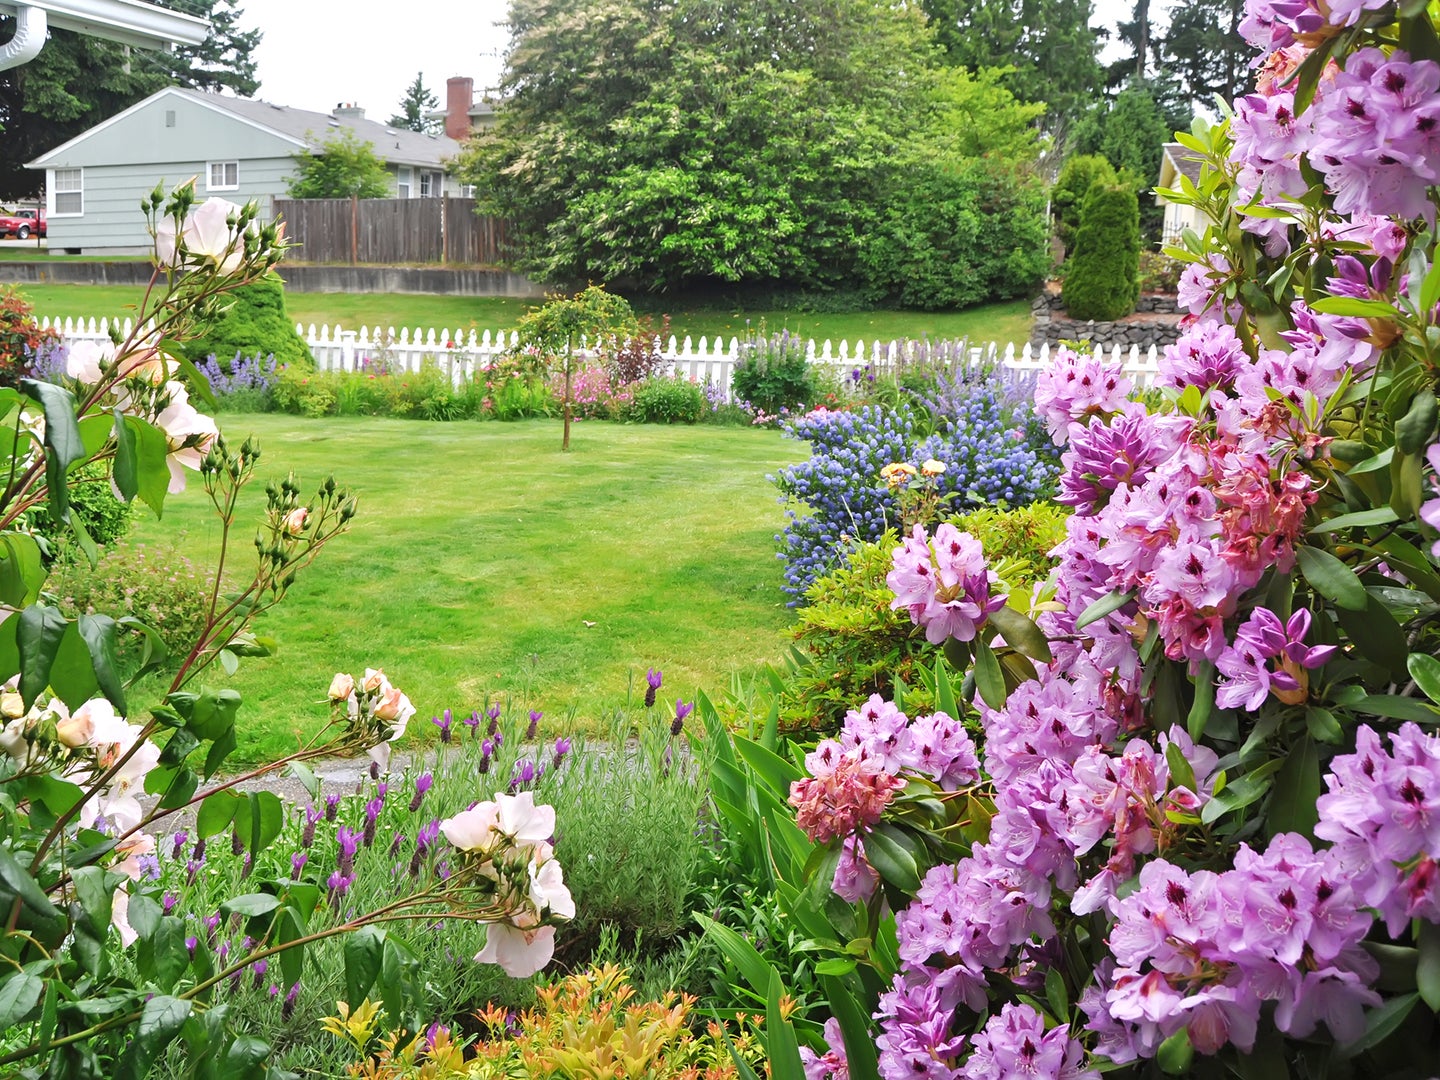 Photo of flowers and grass of a home landscape to illustrate a story about adapting to longer growing seasons.